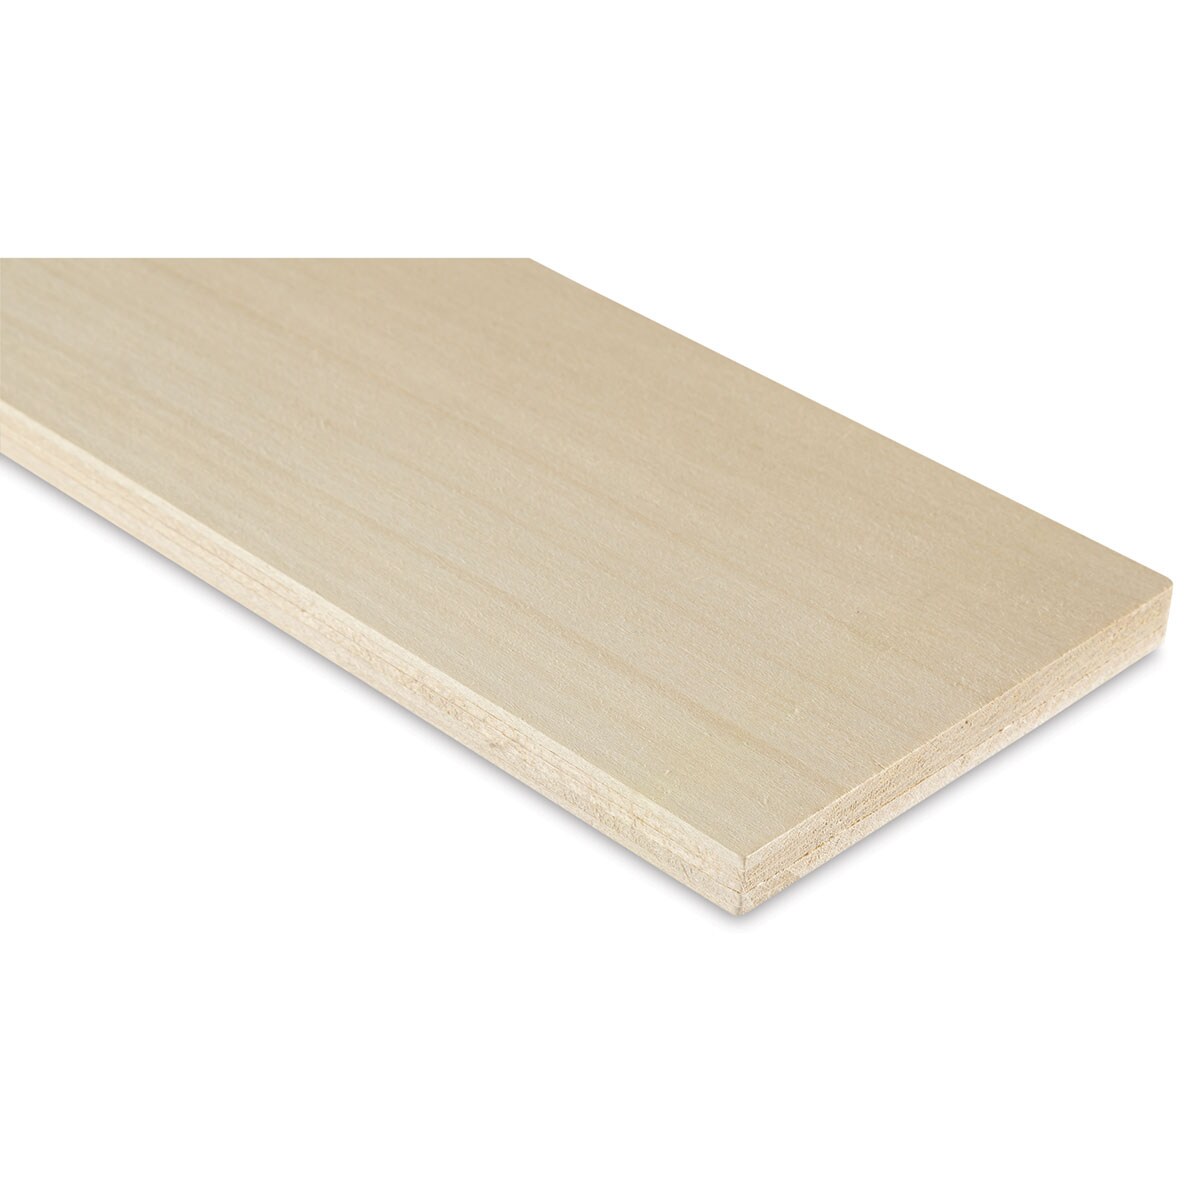 Midwest Basswood Sheets 3/32 x 4 x 24